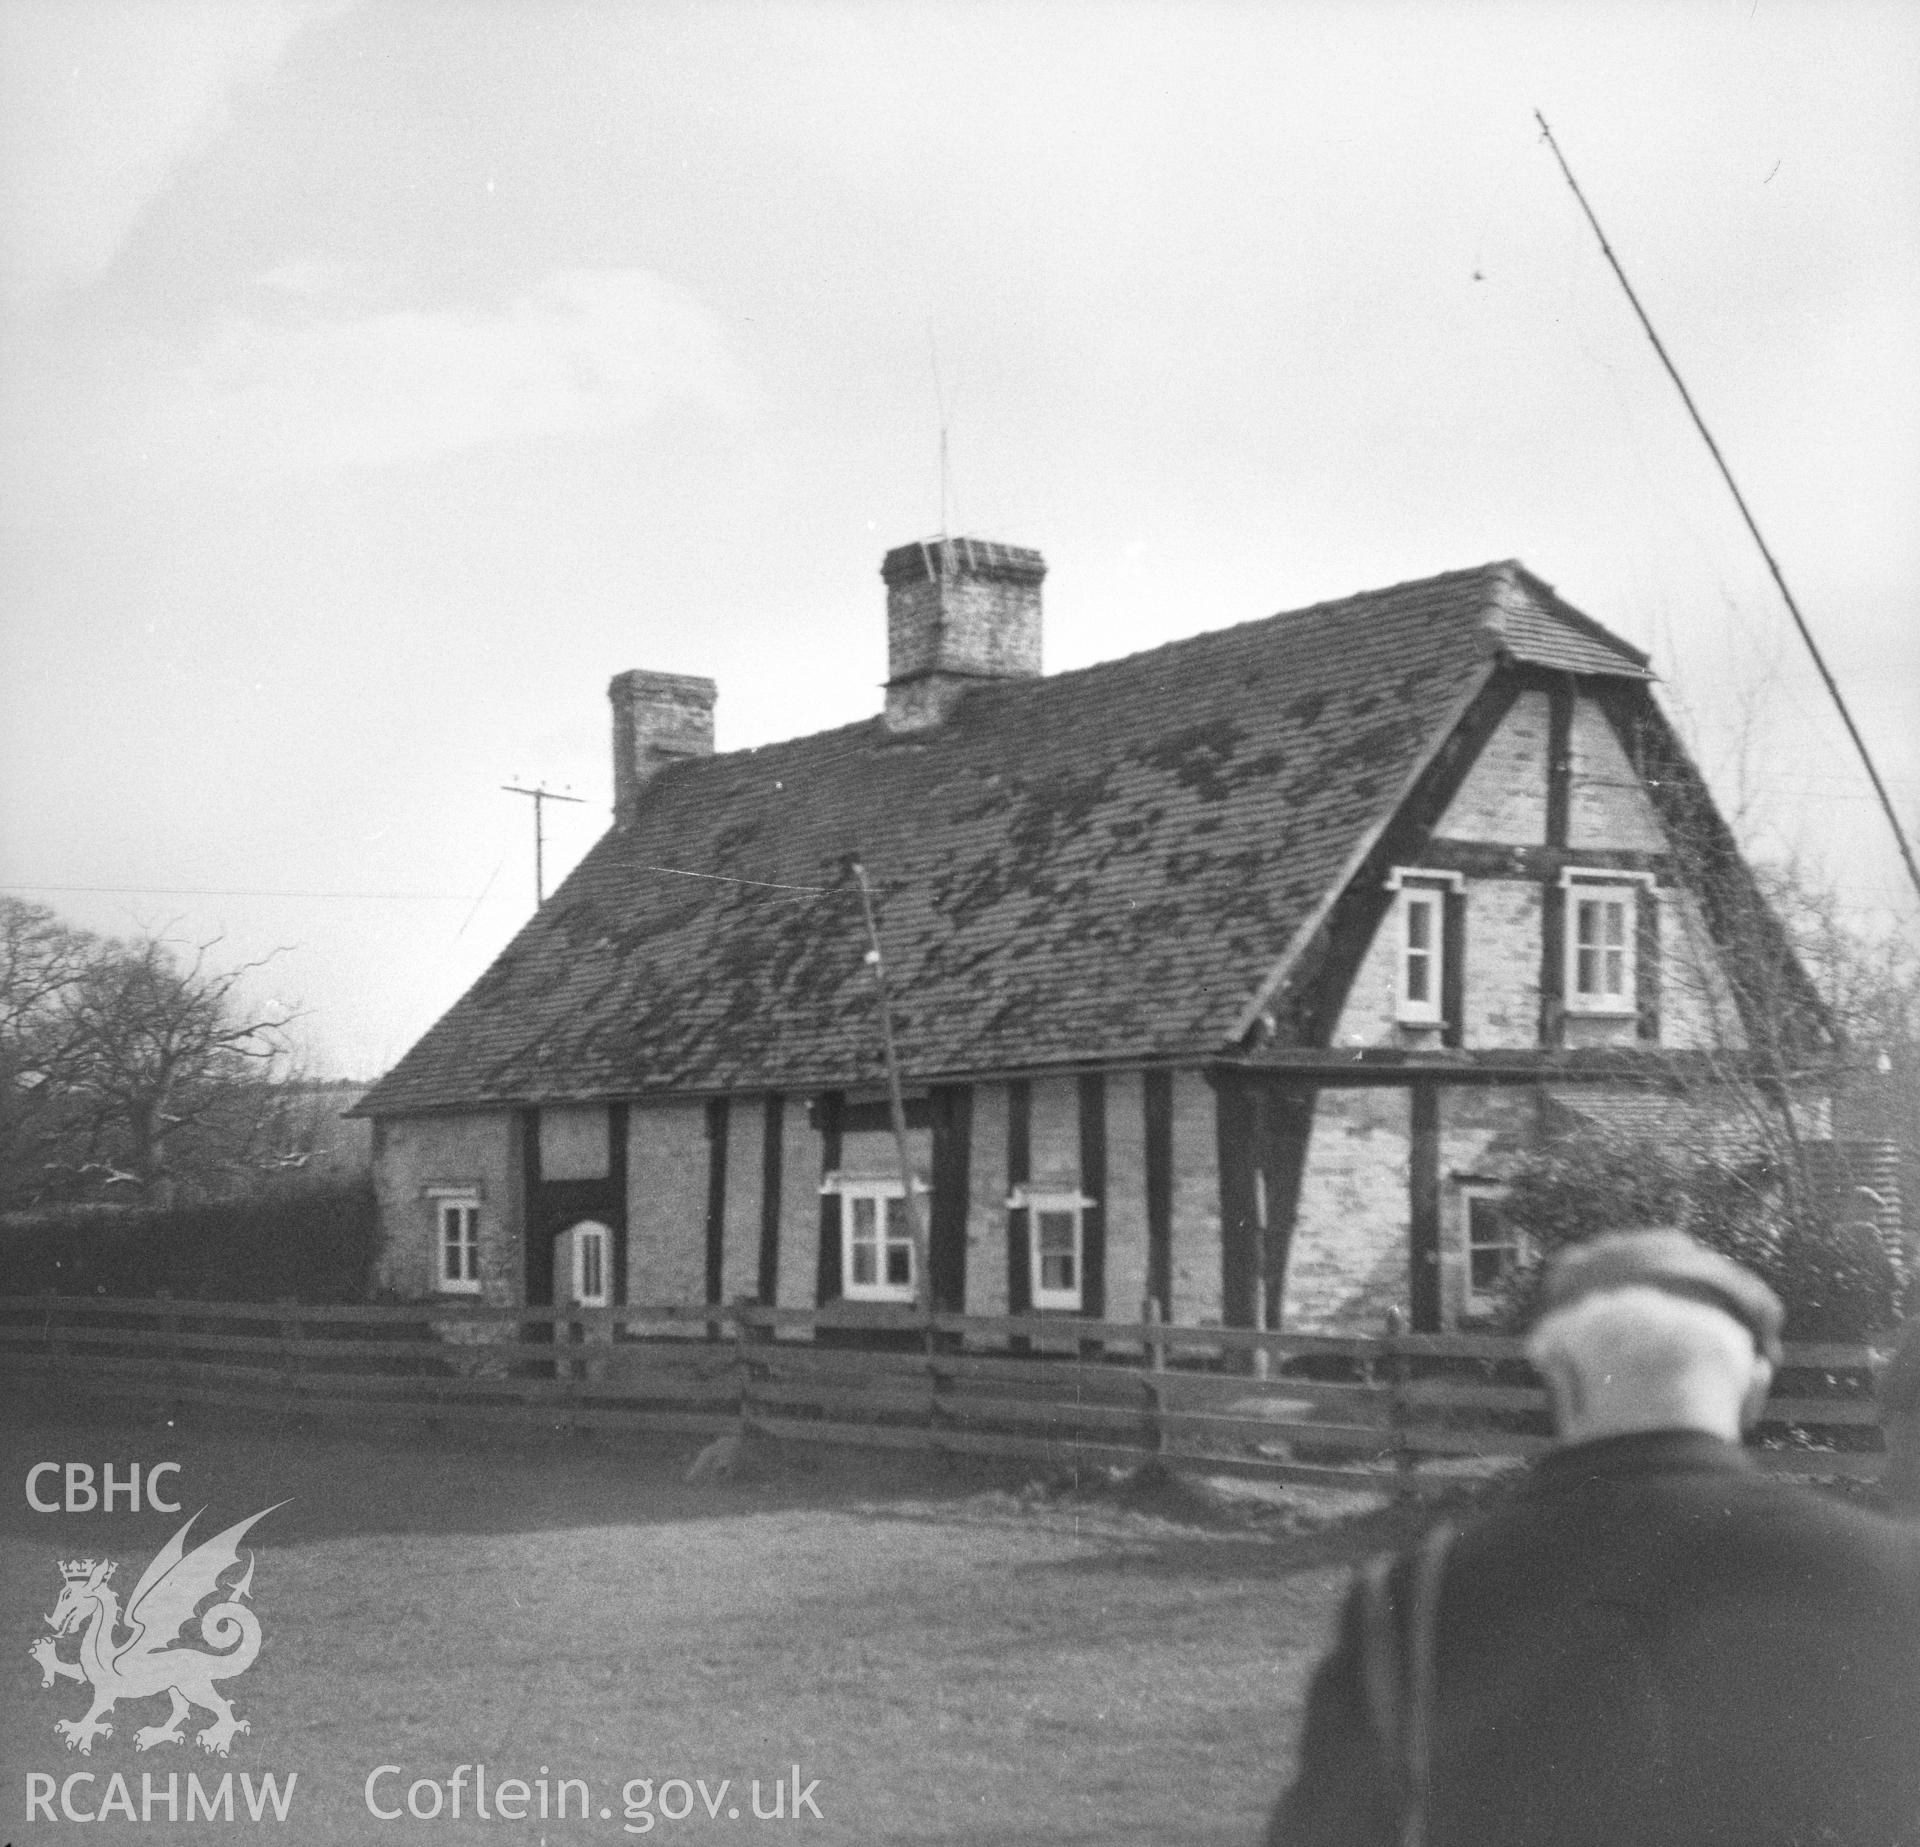 Digital copy of a black and white nitrate negative, exterior view of Pit Cottage, Llanarth, Monmouthshire.